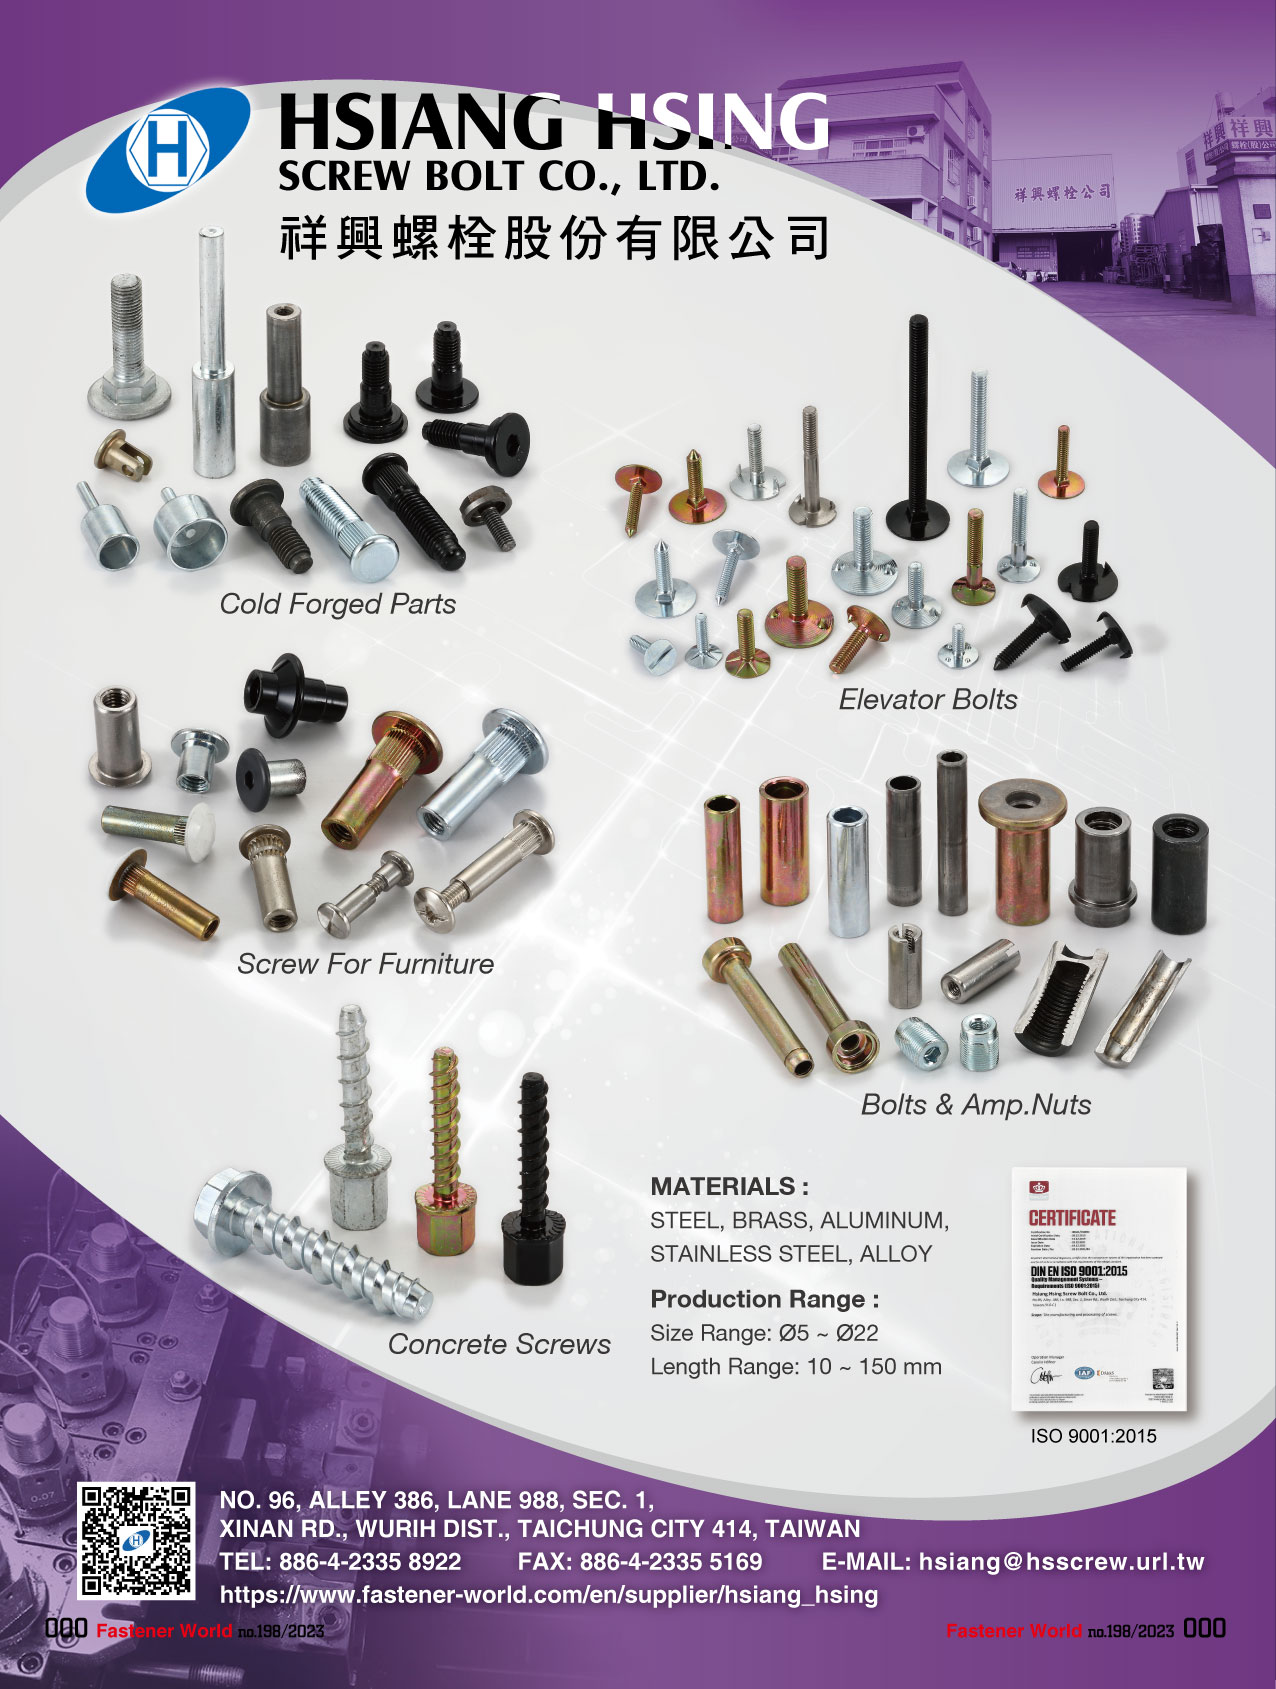 HSIANG HSING SCREW BOLT CO., LTD.  , Cold Forged Parts, Elevator Bolts, Screw for Furniture, Bolts & Amp. Nut, Concrete Screws , Concrete Screws